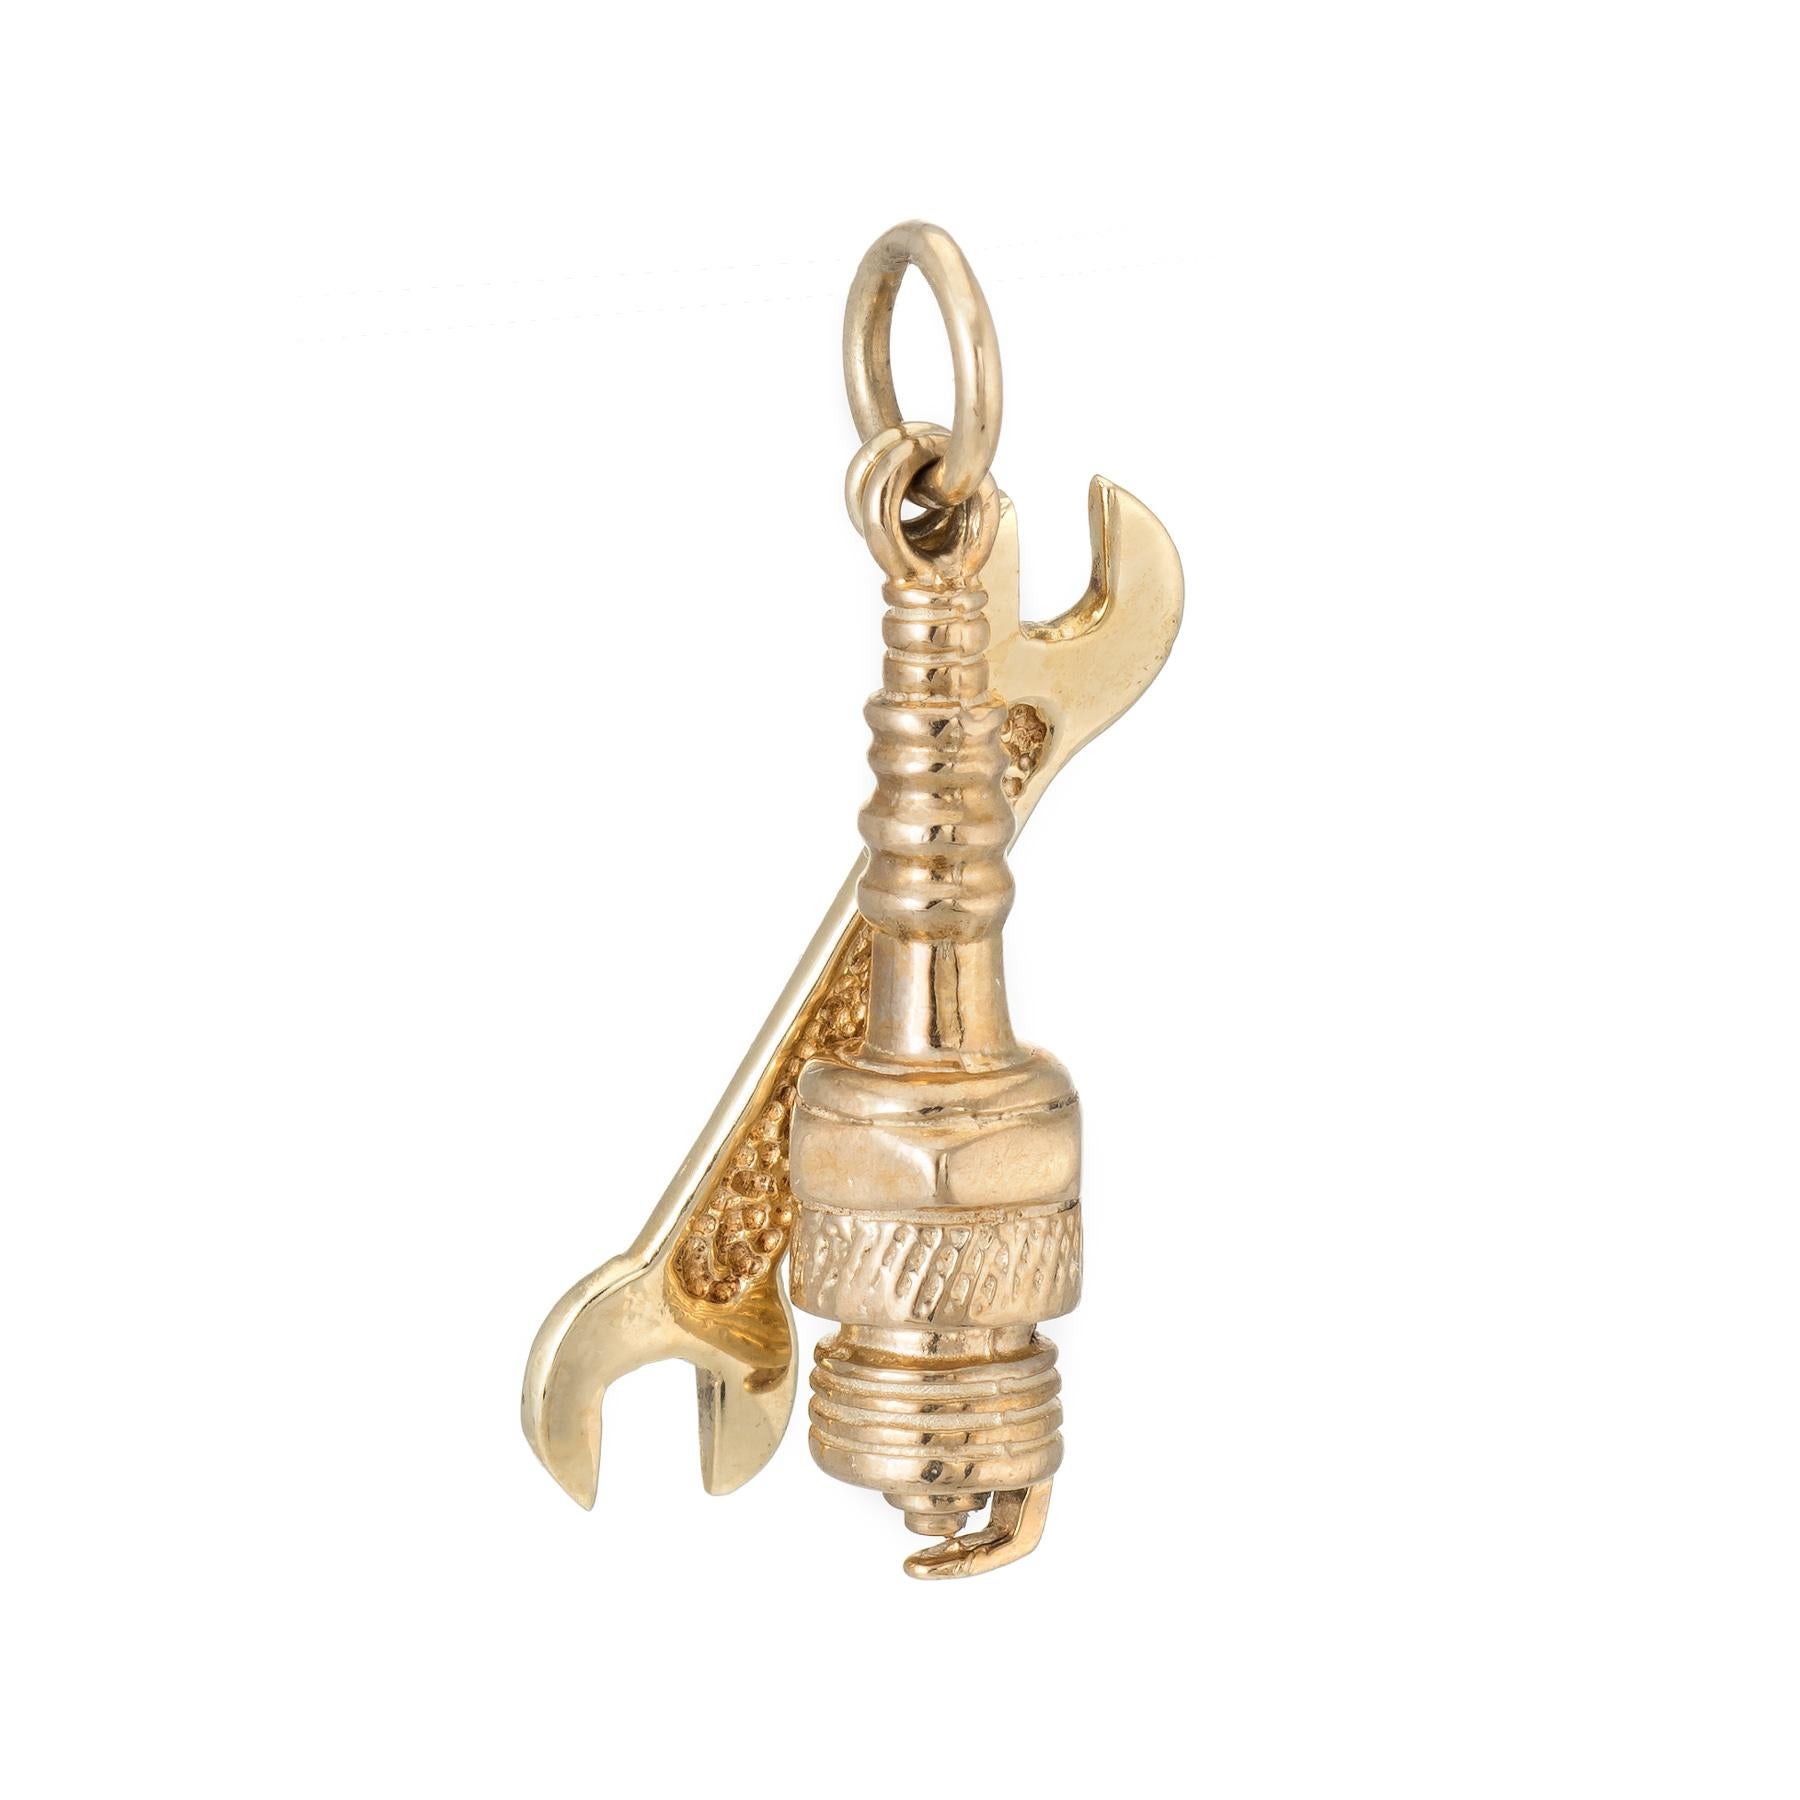 Finely detailed pair of charms, crafted in 10k yellow gold. 

A wrench and a sparkplug are rendered in lifelike detail. 

The charms are in excellent original condition.

Particulars:

Weight: 4.4 grams

Stones: N/A.

Size & Measurements: The charms